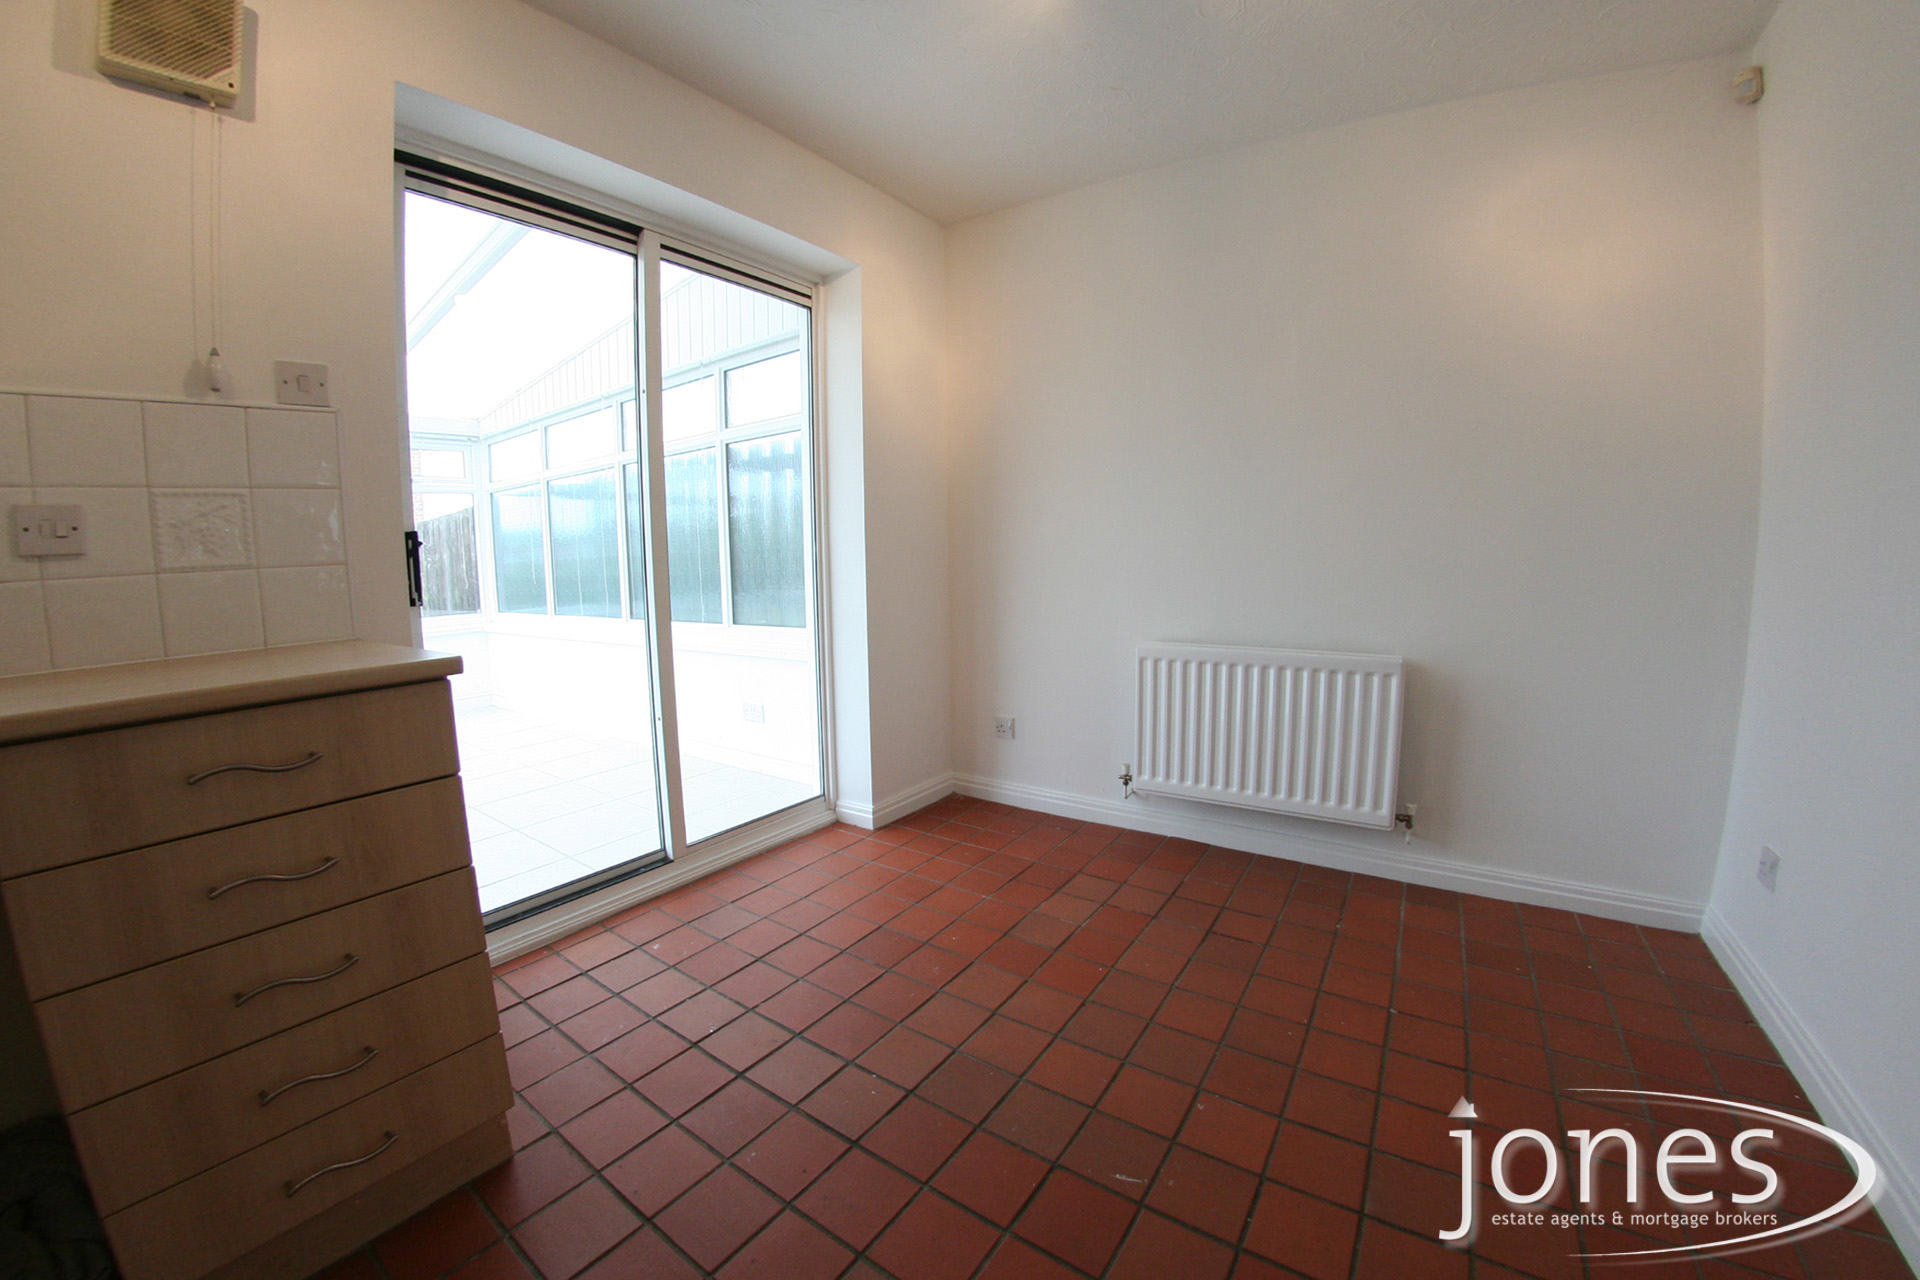 Home for Sale Let - Photo 04 Honeycomb Avenue, Stockton on Tees, TS19 0FF